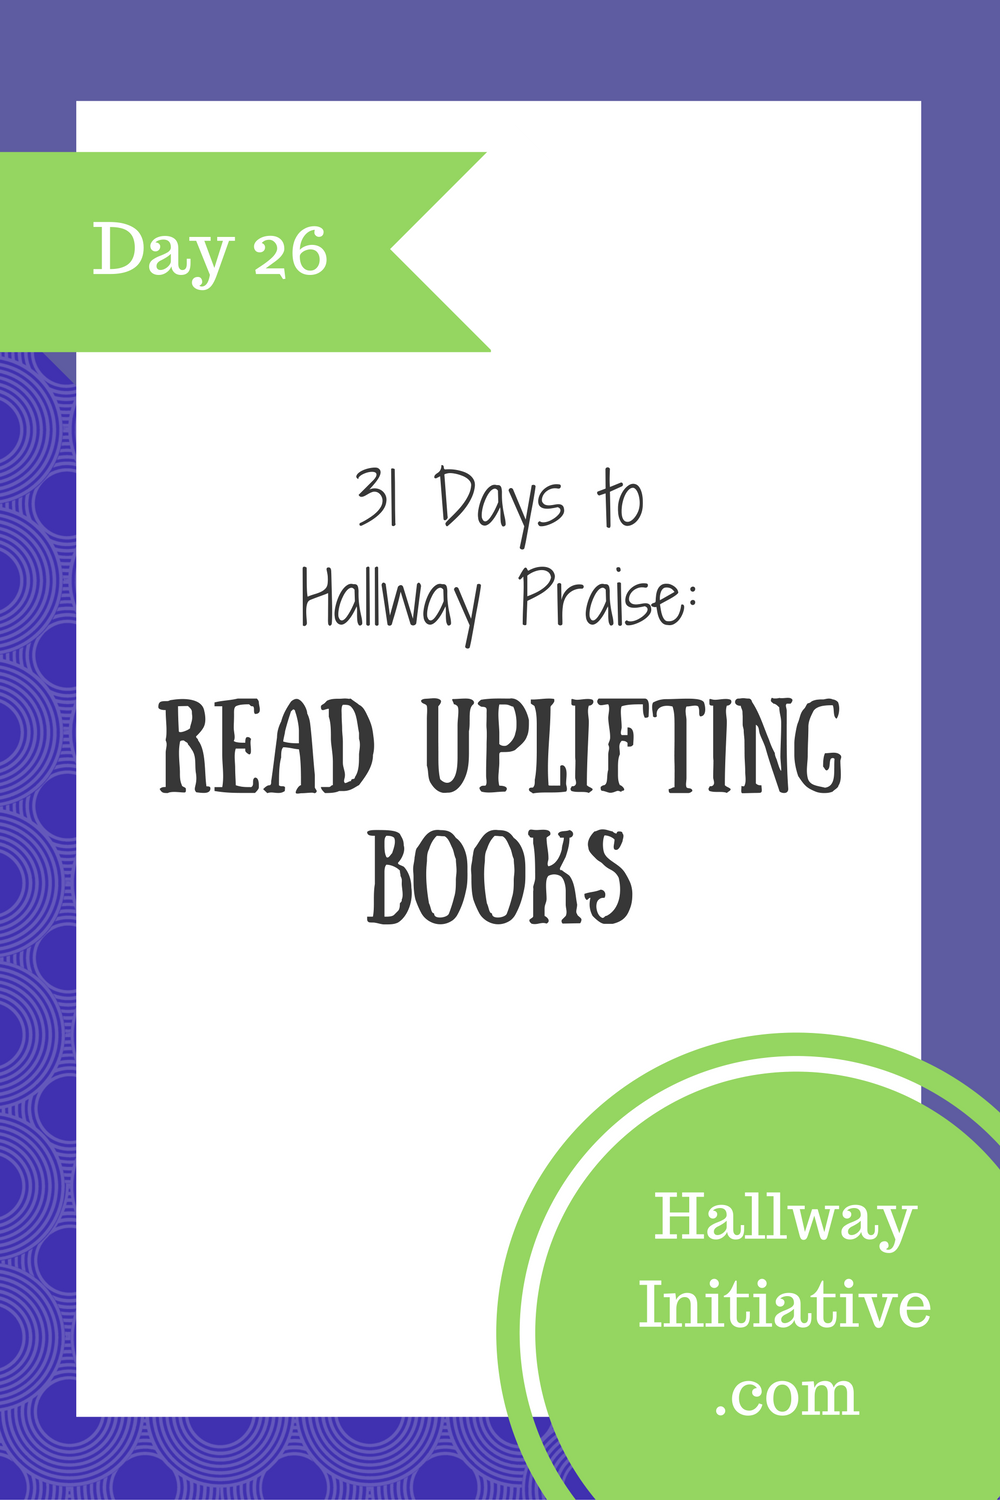 Day 26: read uplifting books